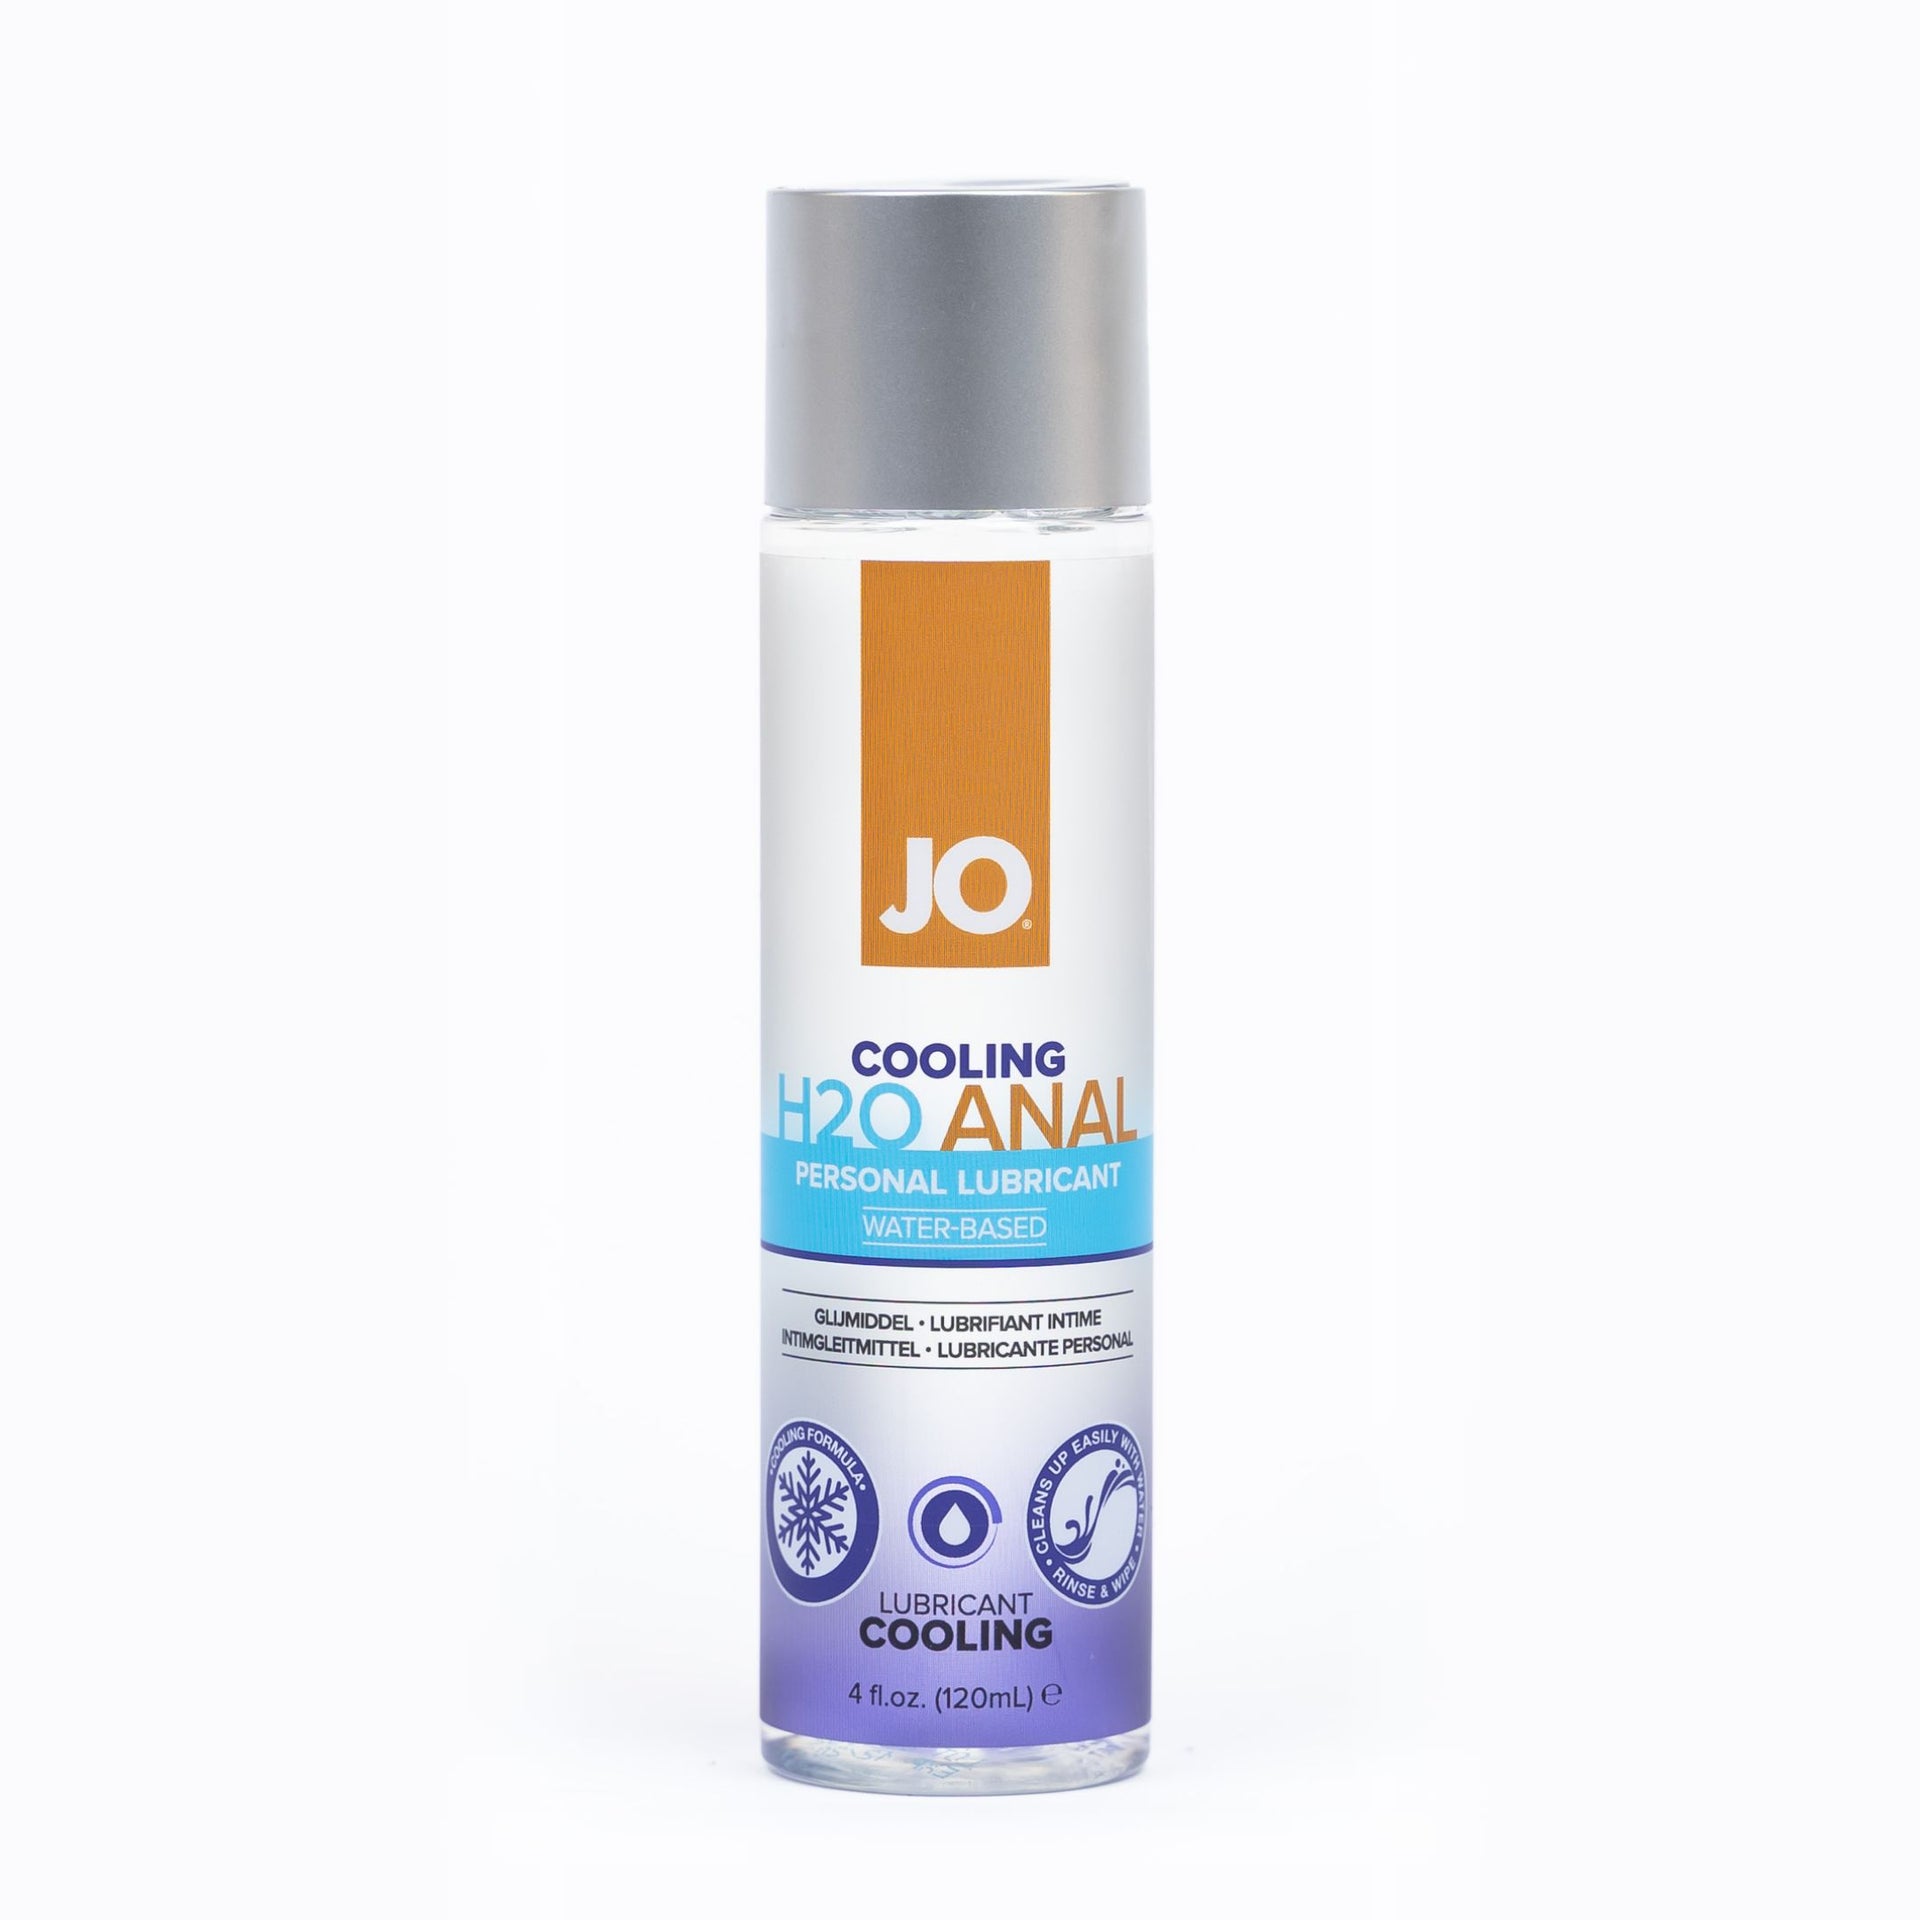 H2O Anal Cooling Lubricant